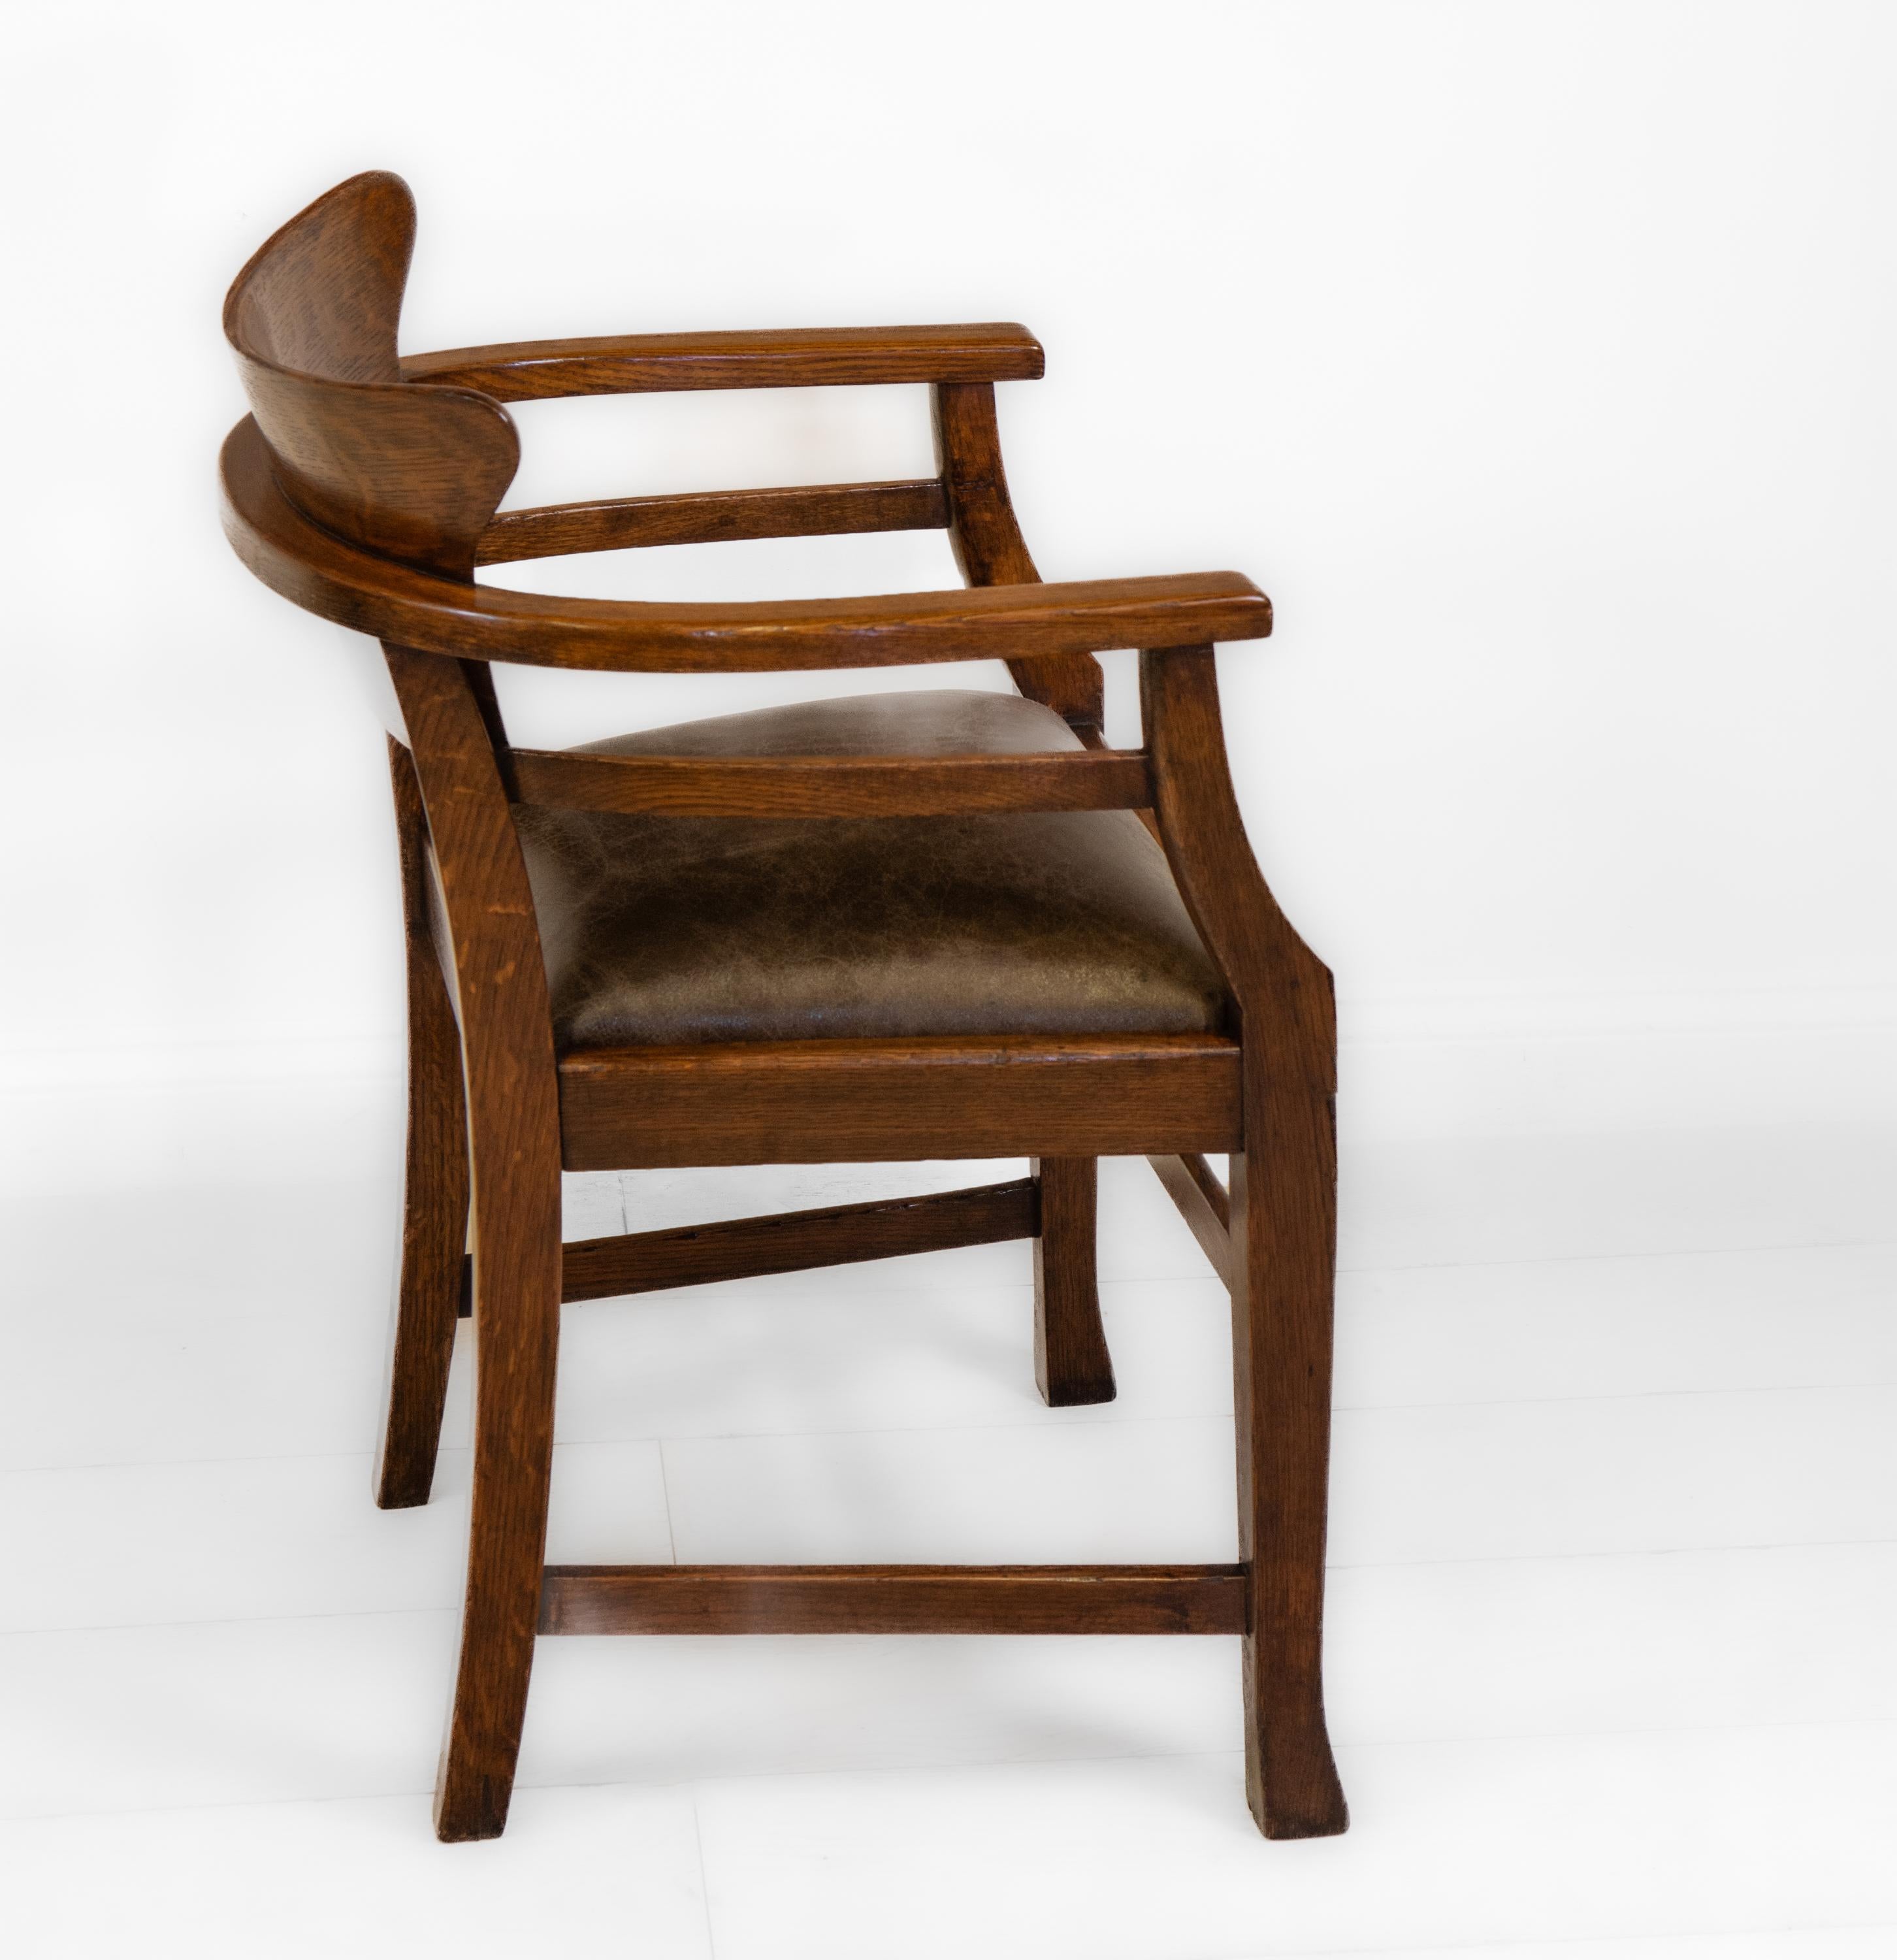 Arts and Crafts Art & Crafts Oak and Leather Desk Chair In The Richard Riemerschmid Manner